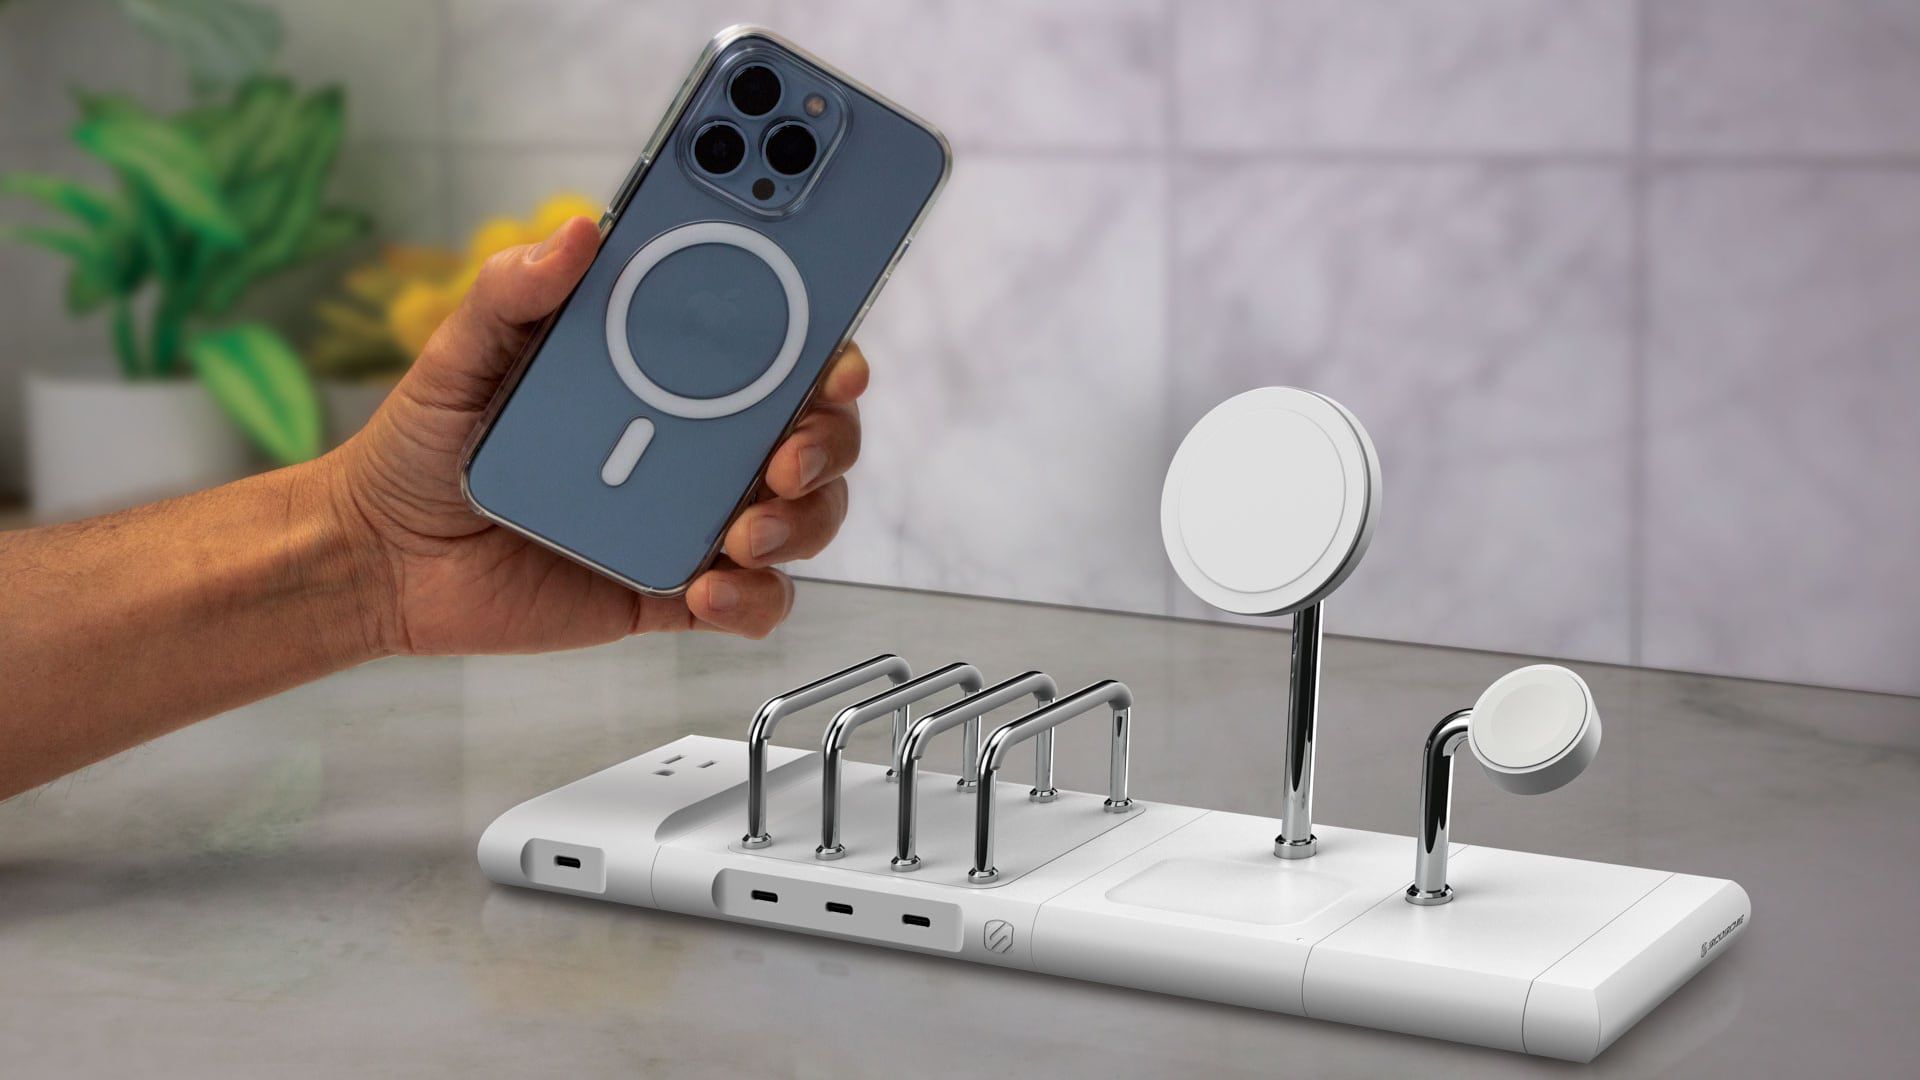 CES 2023: Scosche Announces BaseLynx 2.0 Modular Charging System and Water Bottle MagSafe Mount - macrumors.com